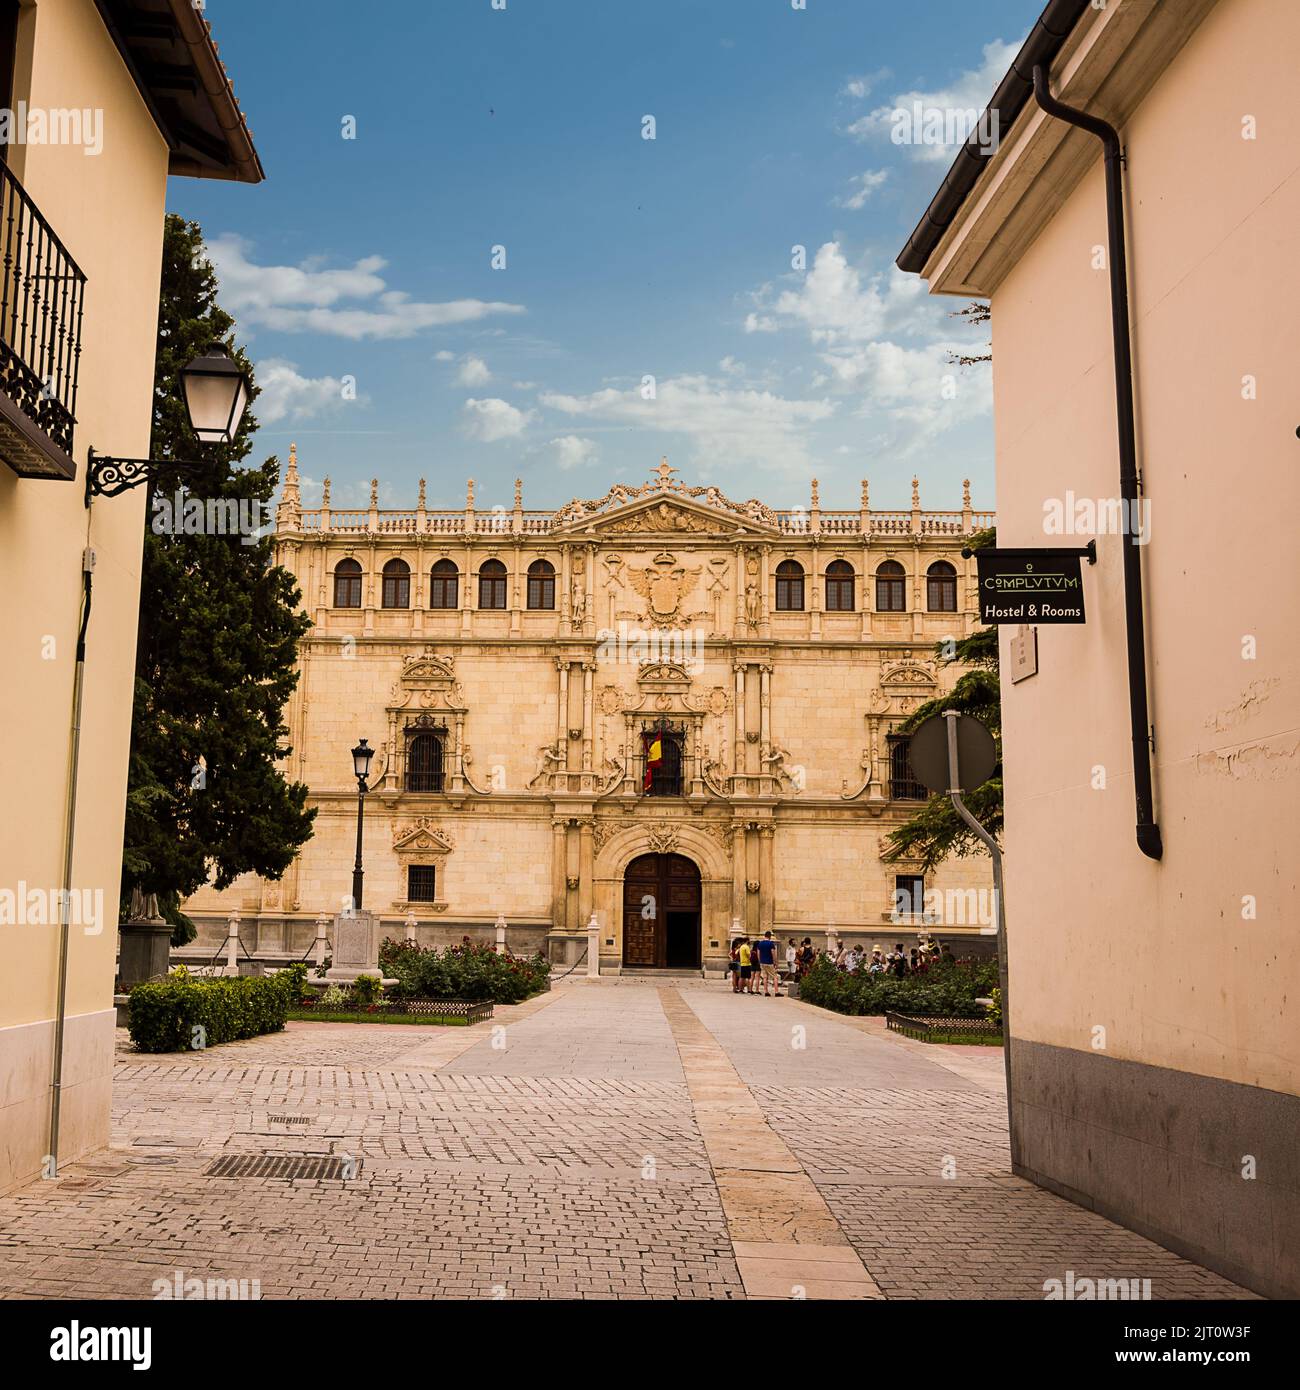 Alcalá de Henares, Spain - June 18, 2022: Facade of the building of the College of Saint Ildefonso, seat of the University of Alcalá de Henares Stock Photo